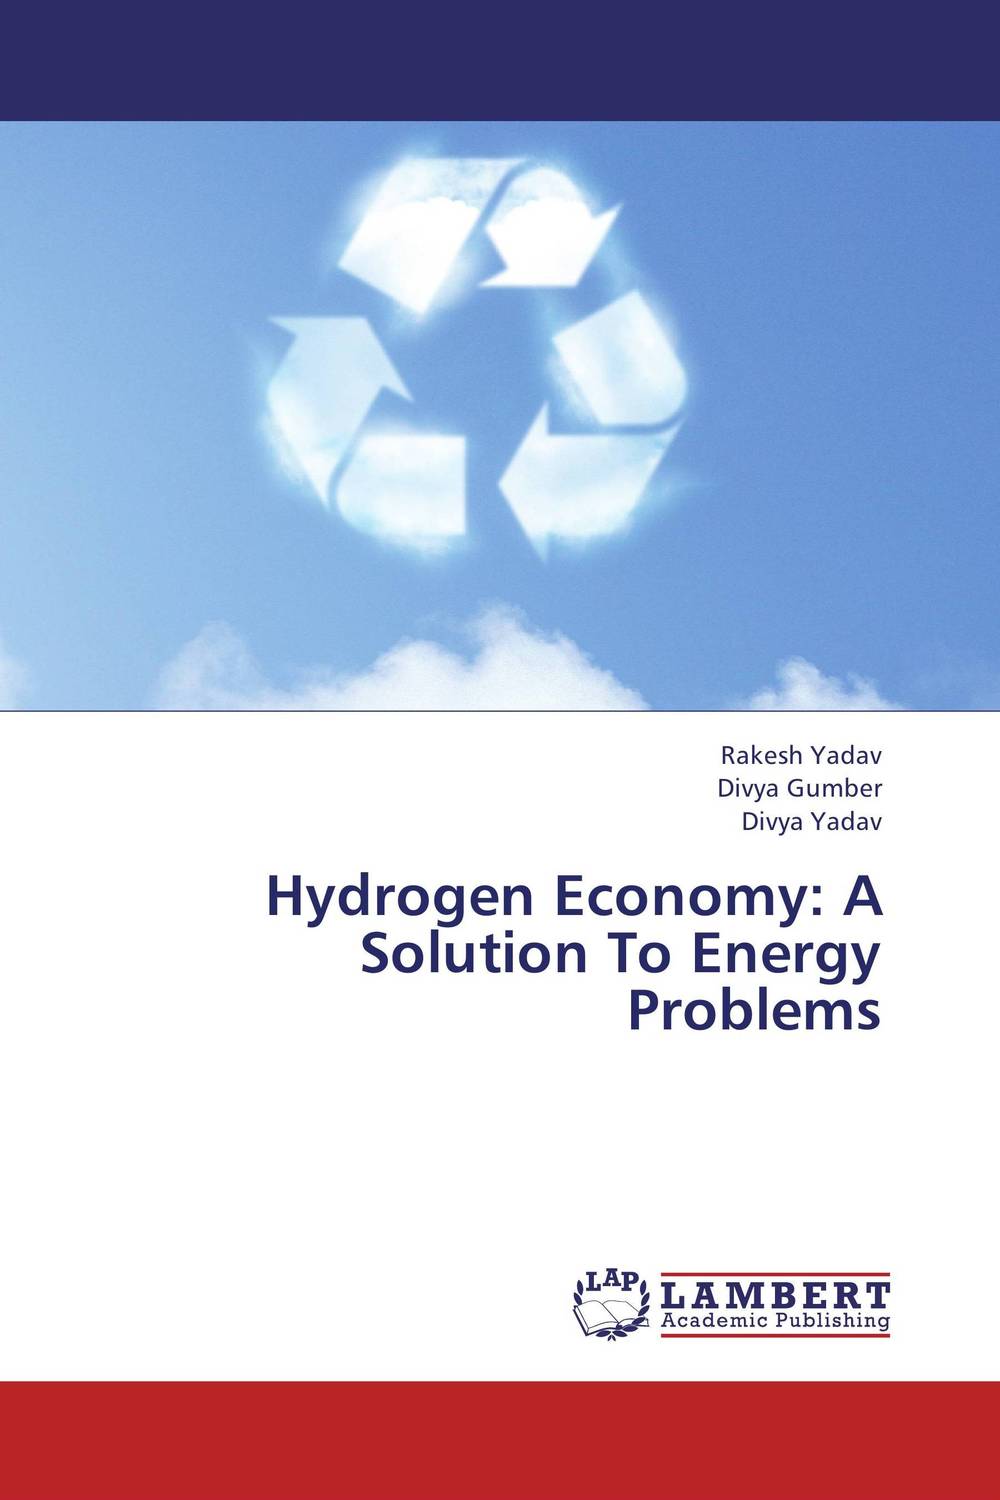 Hydrogen Economy: A Solution To Energy Problems